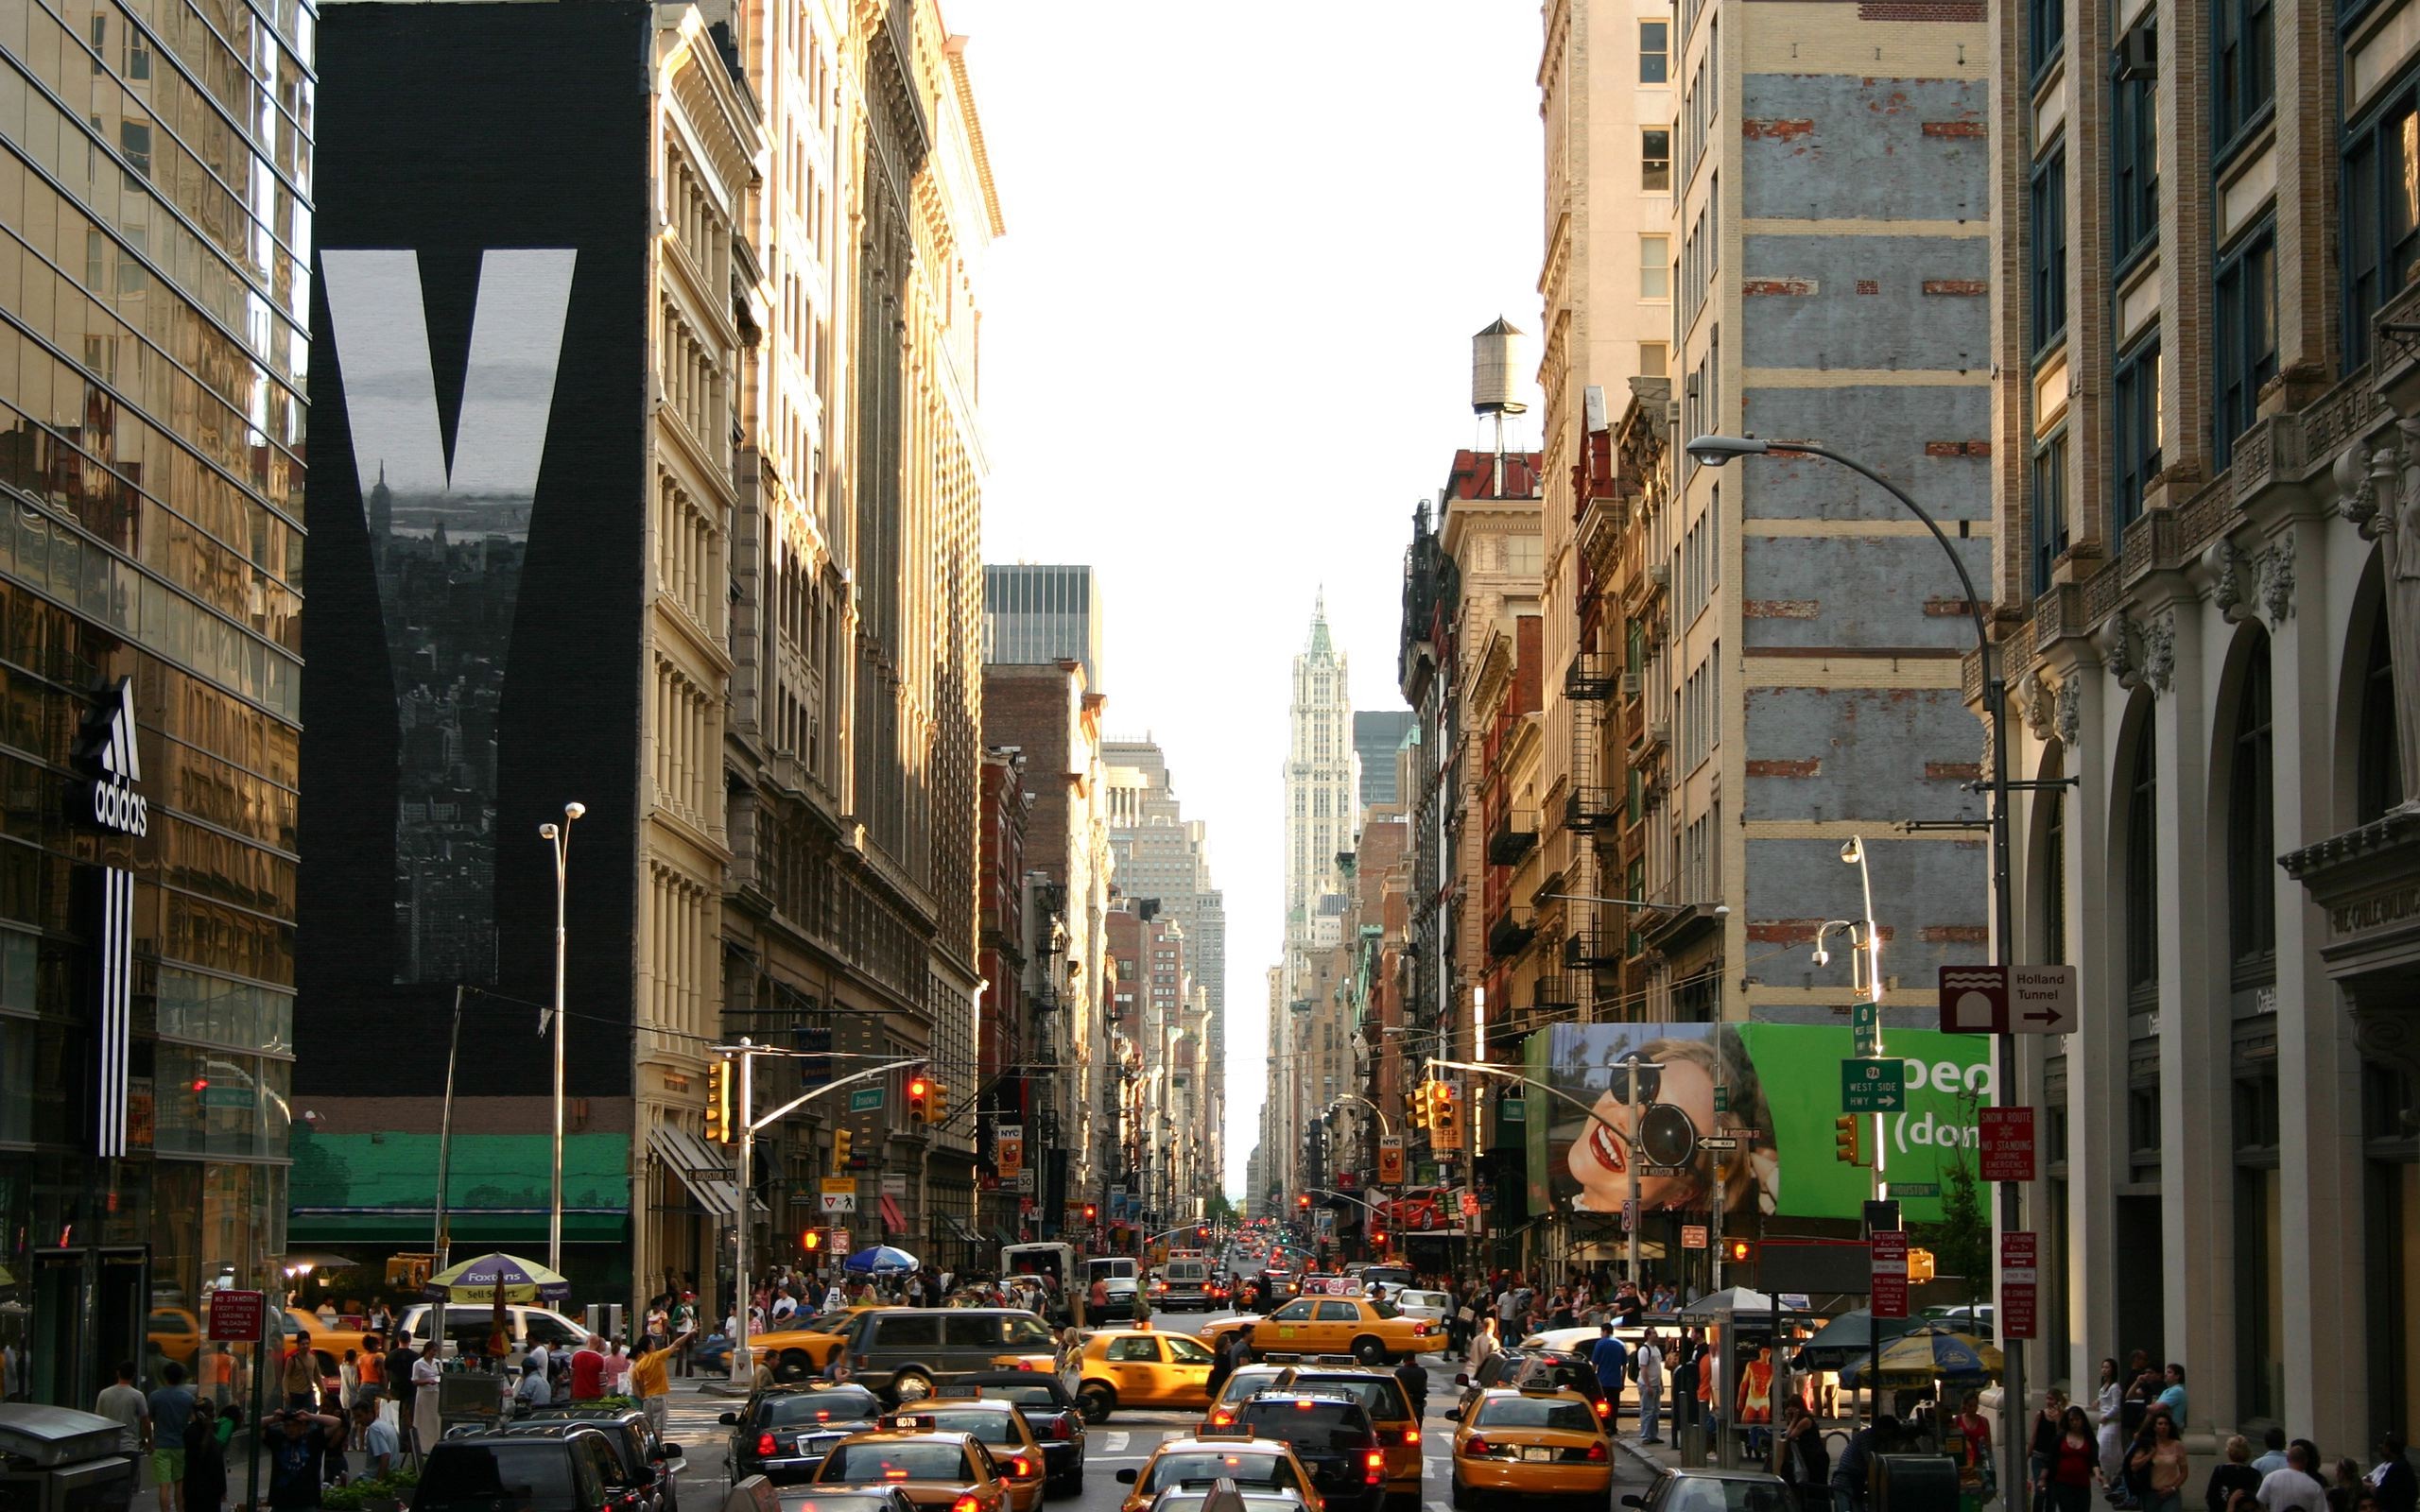 General 2560x1600 New York City cityscape traffic advertisements taxi city street USA